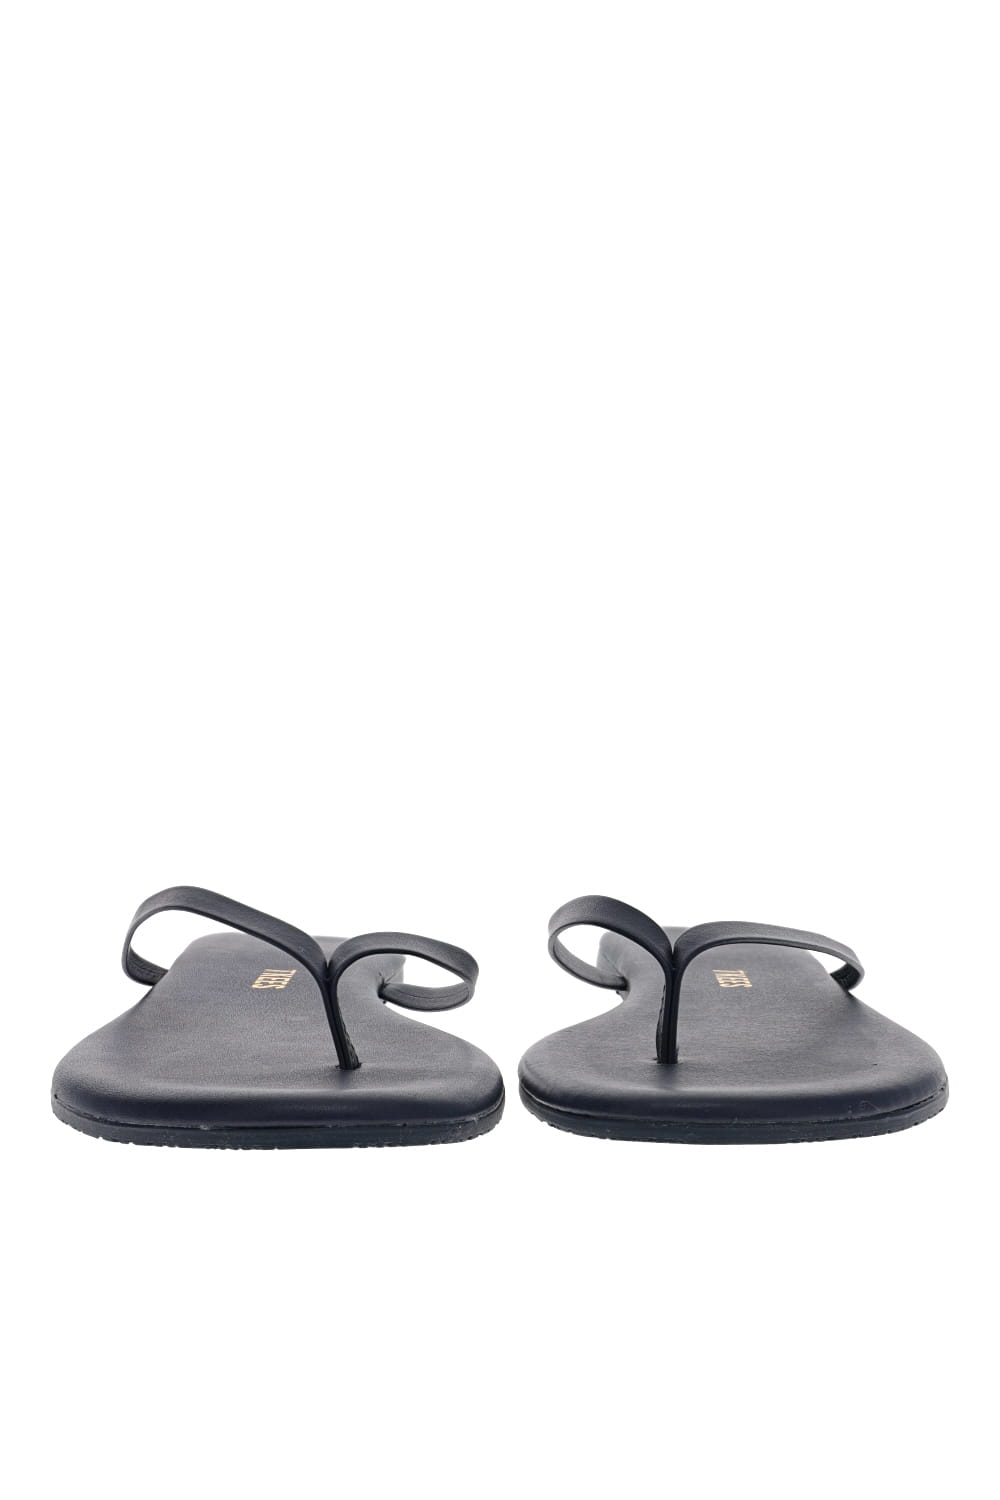 TKEES Solids No.38 Navy Leather Sandal